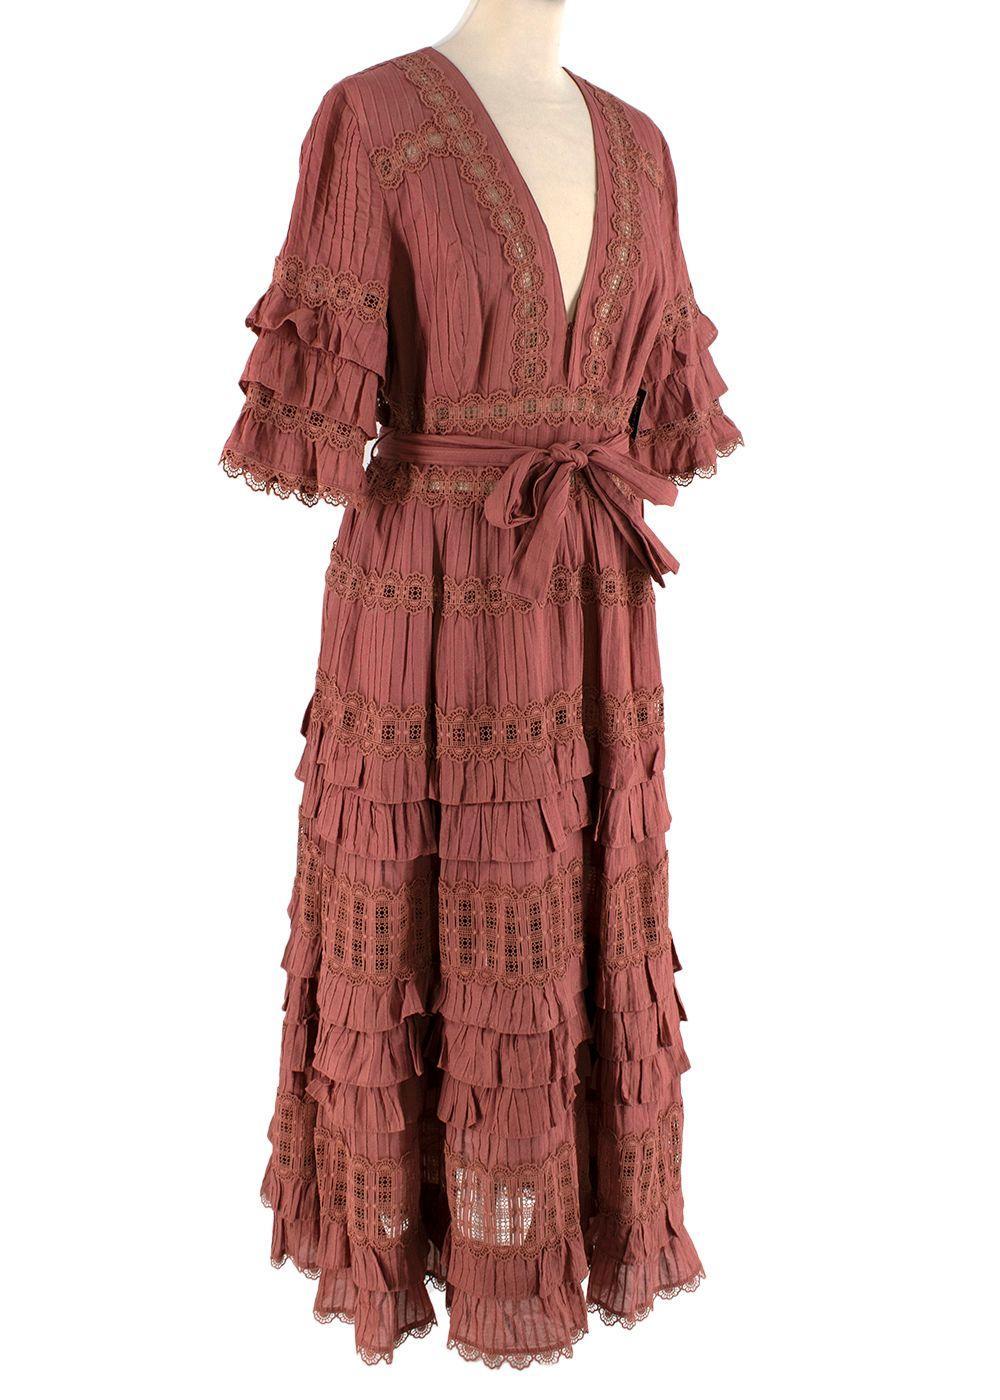 Zimmermann Vintage Rose Pin-Tucked Cotton Tiered Dress

- Warm muted rose hue
- Lightweight cotton with narrow pin-tucks
- Deep, lace trimmed v-neck
- Tiered, ruffled half sleeves and maxi hemline
- Self-tie belt
- Concealed side zip